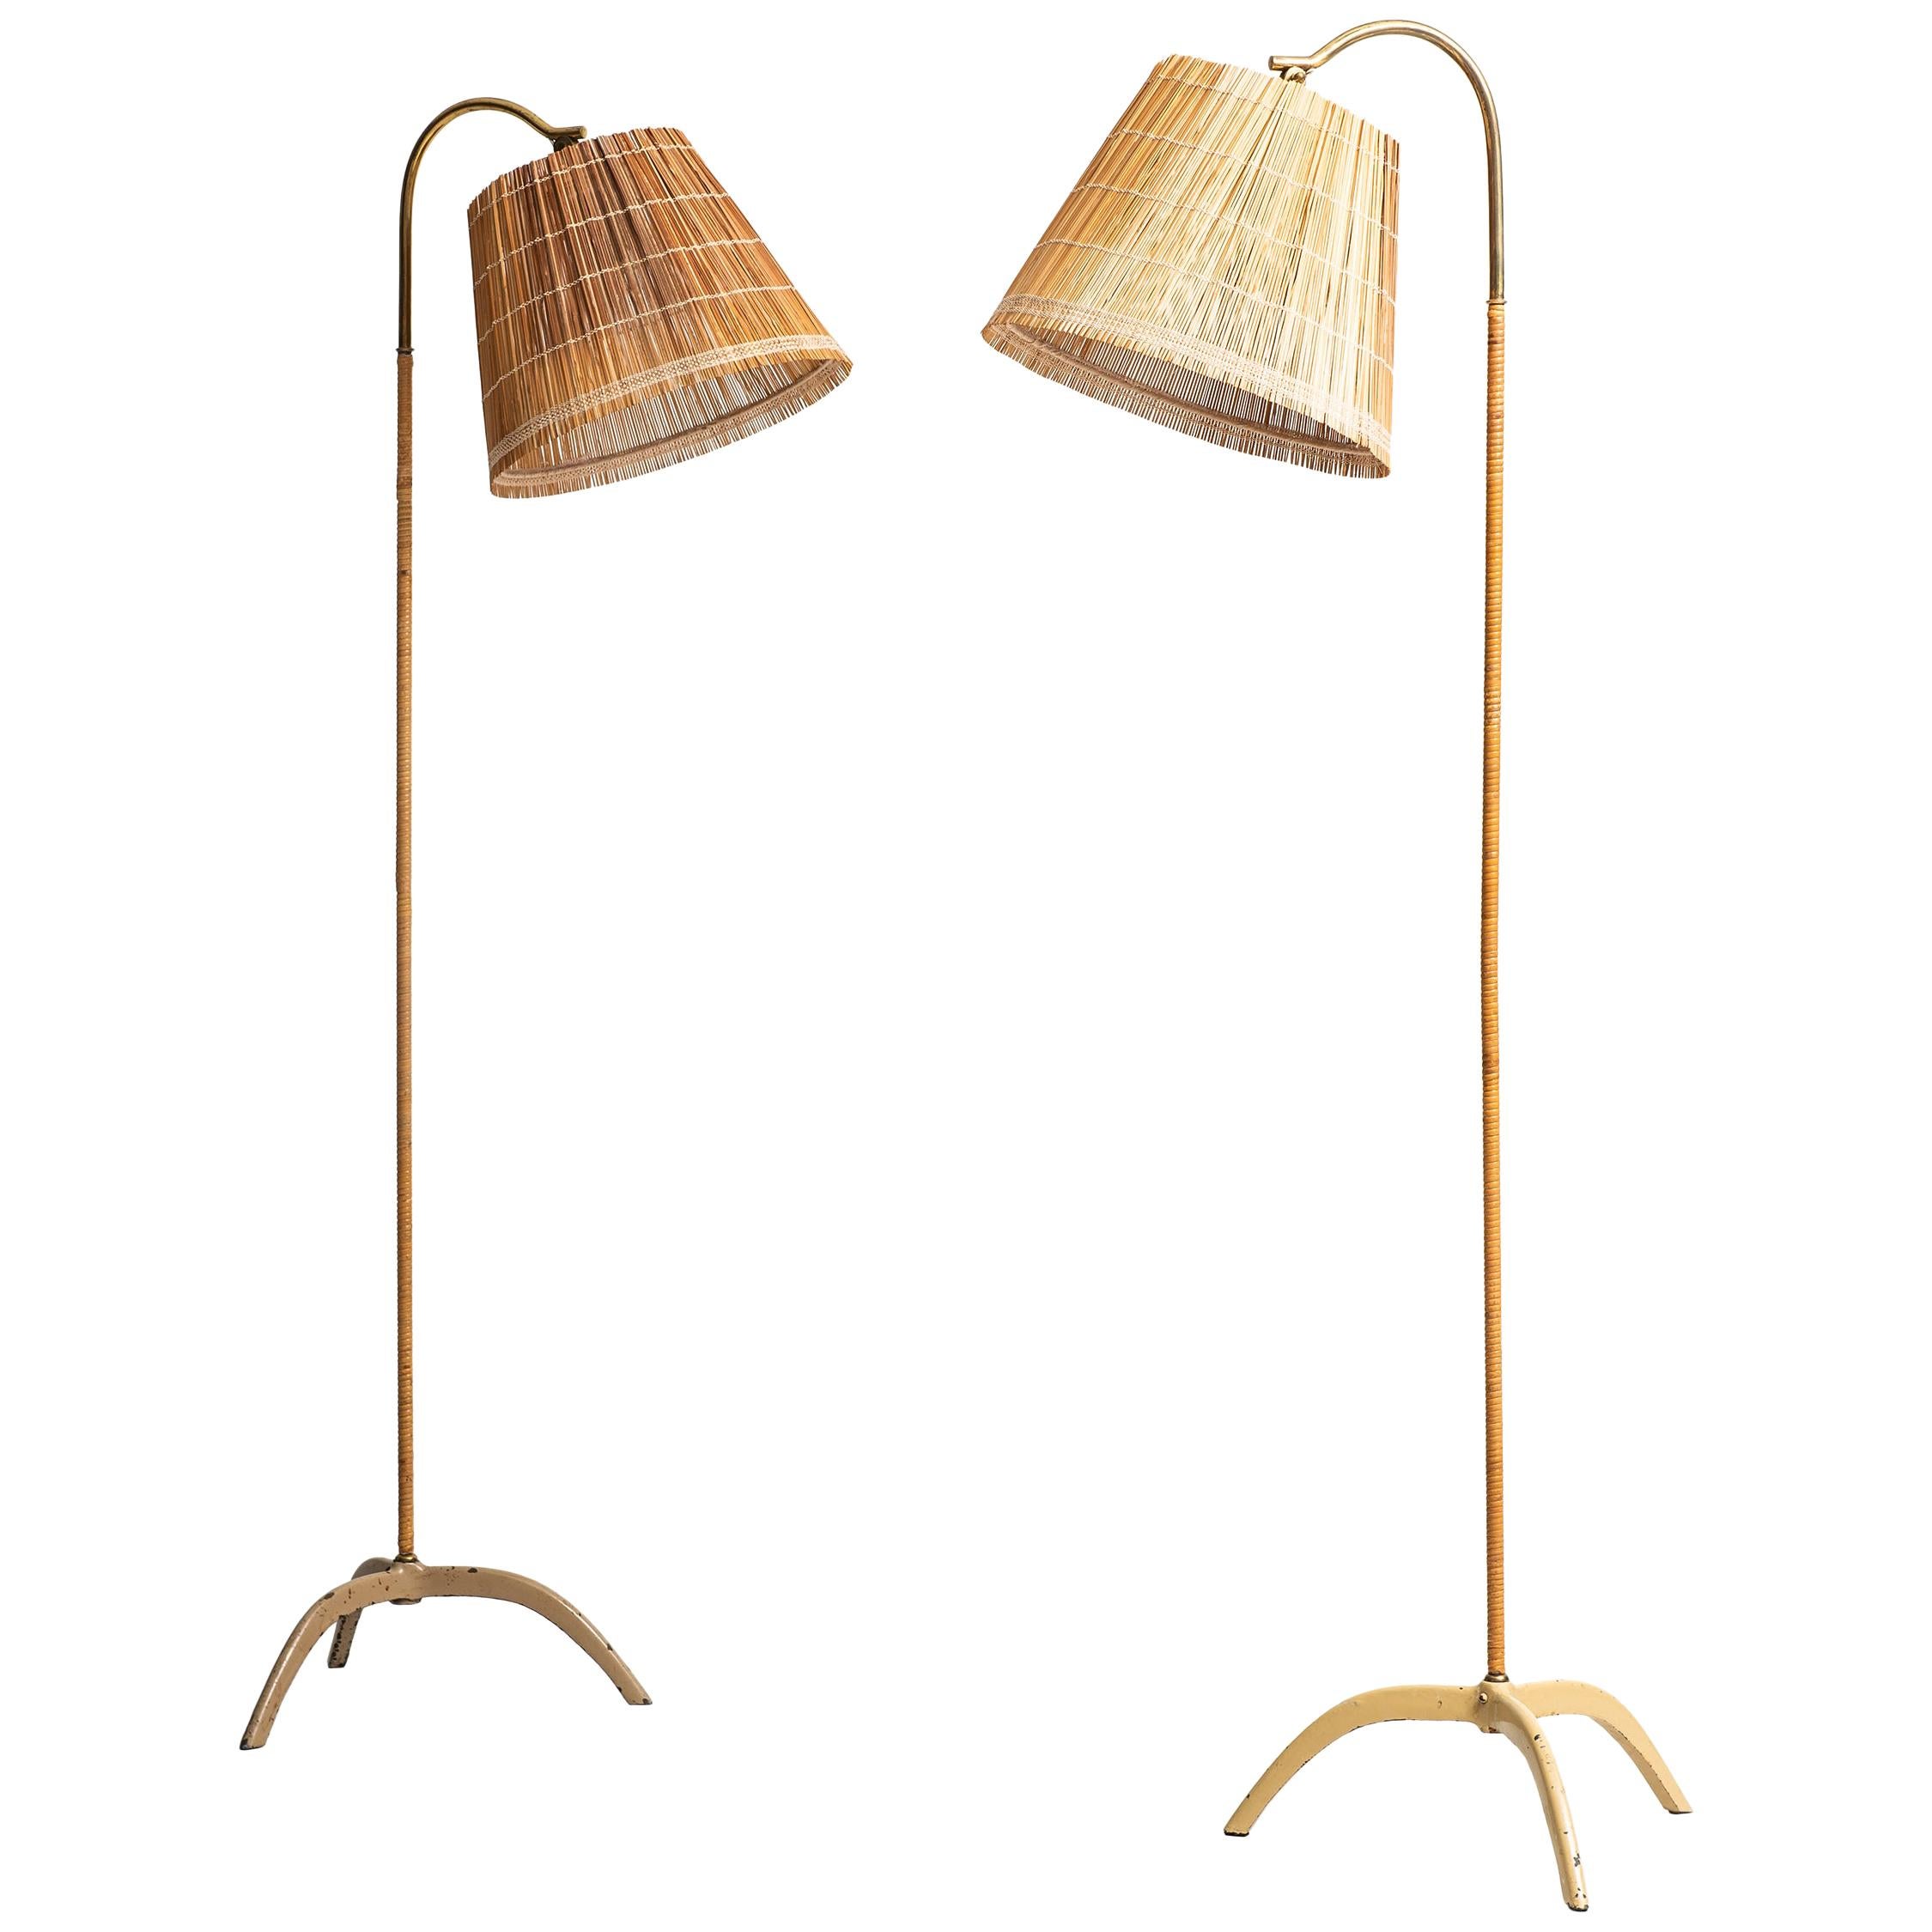 Paavo Tynell Floor Lamps Produced by Taito Oy in Finland